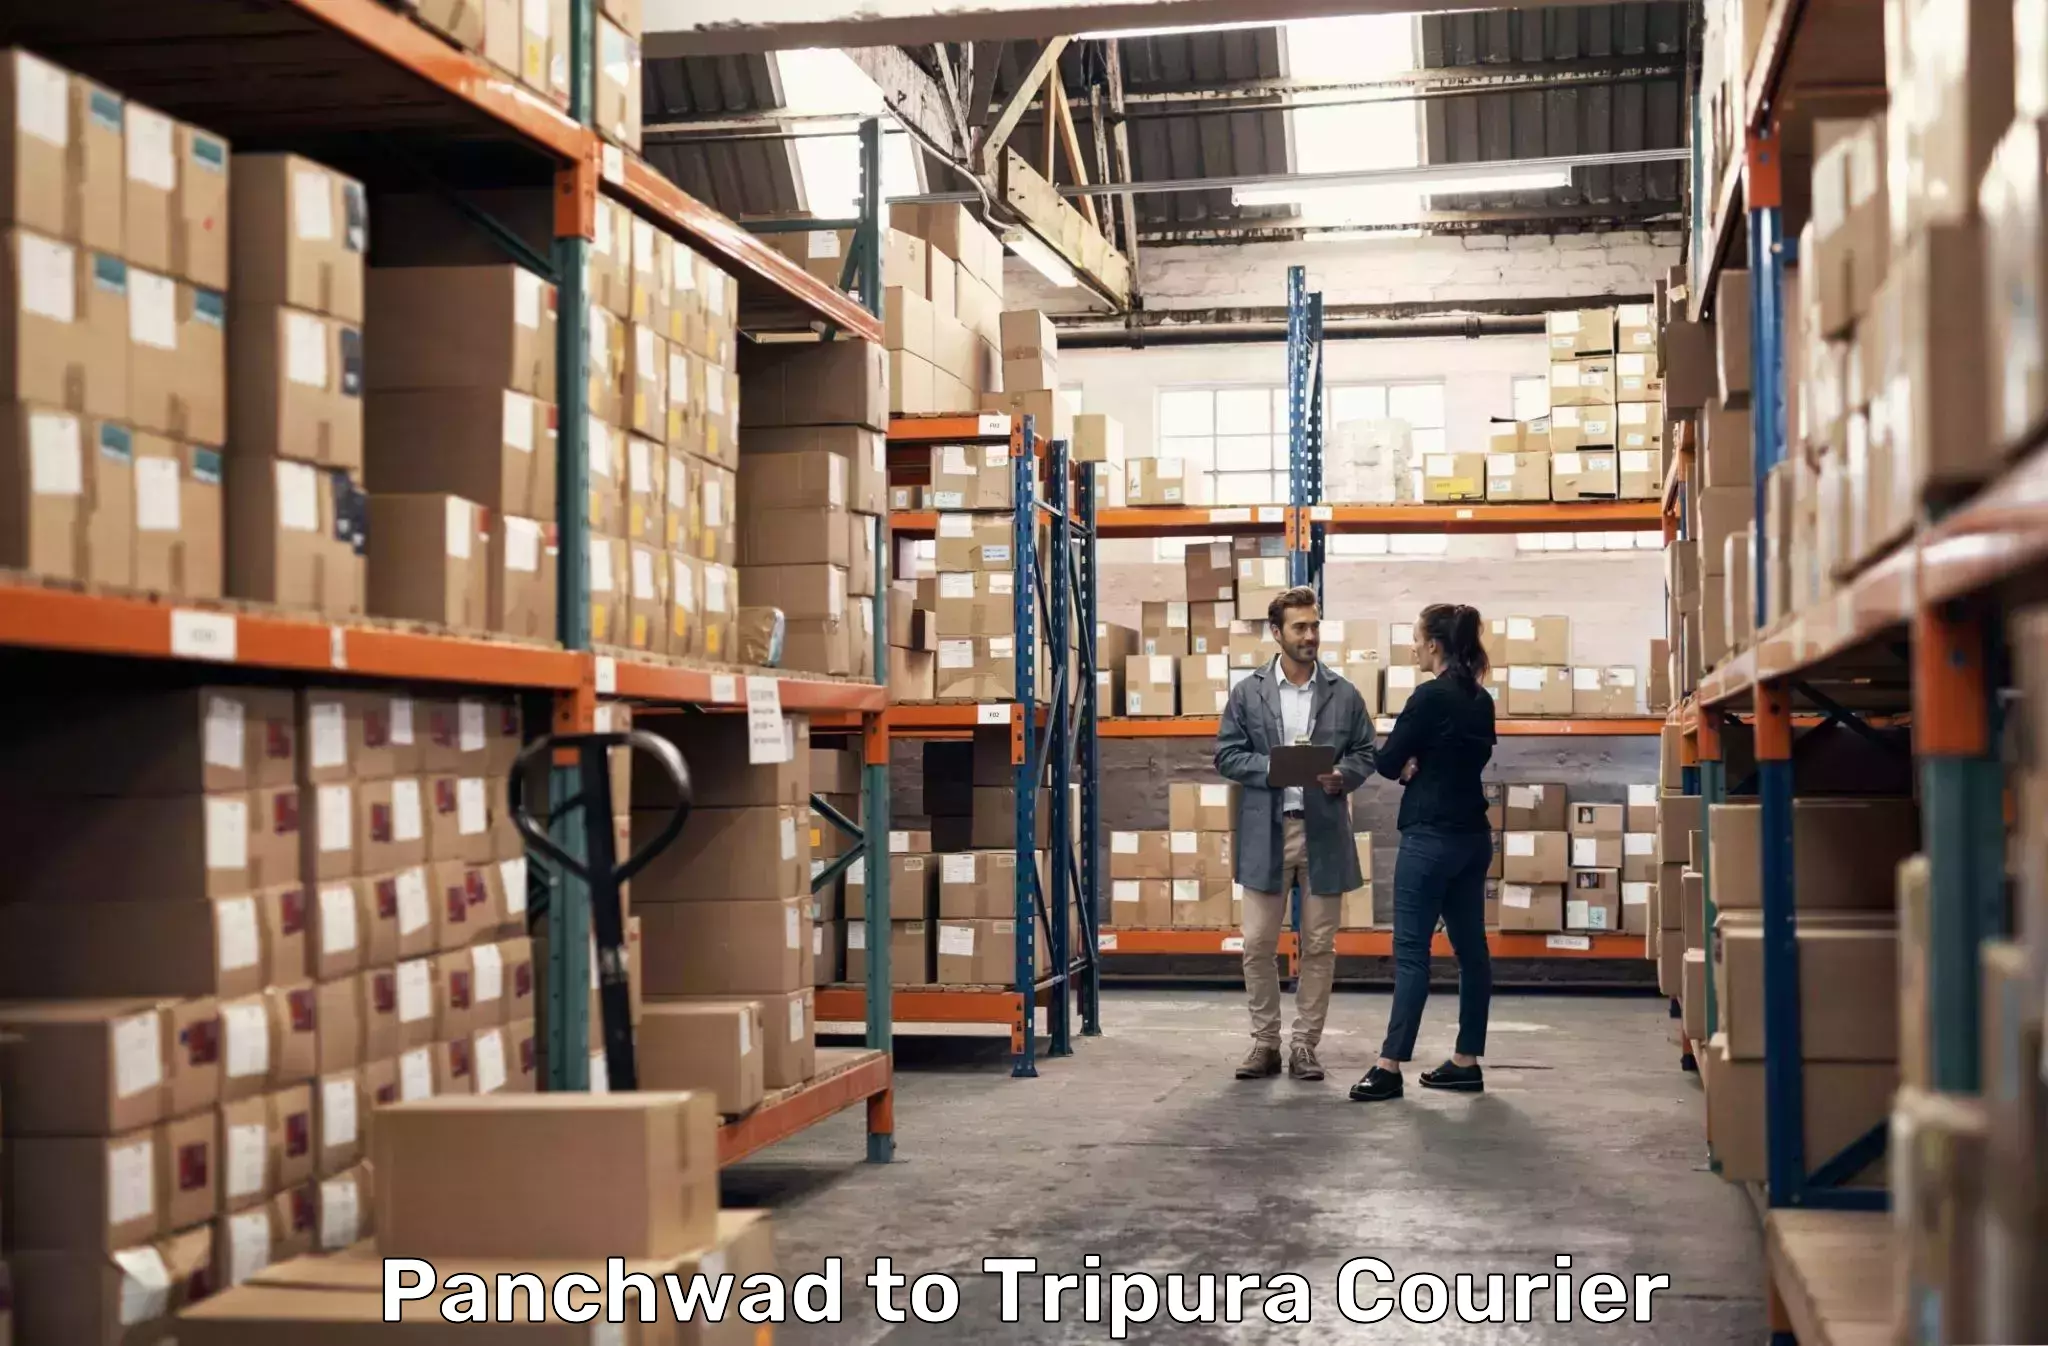 Advanced package delivery Panchwad to Udaipur Tripura